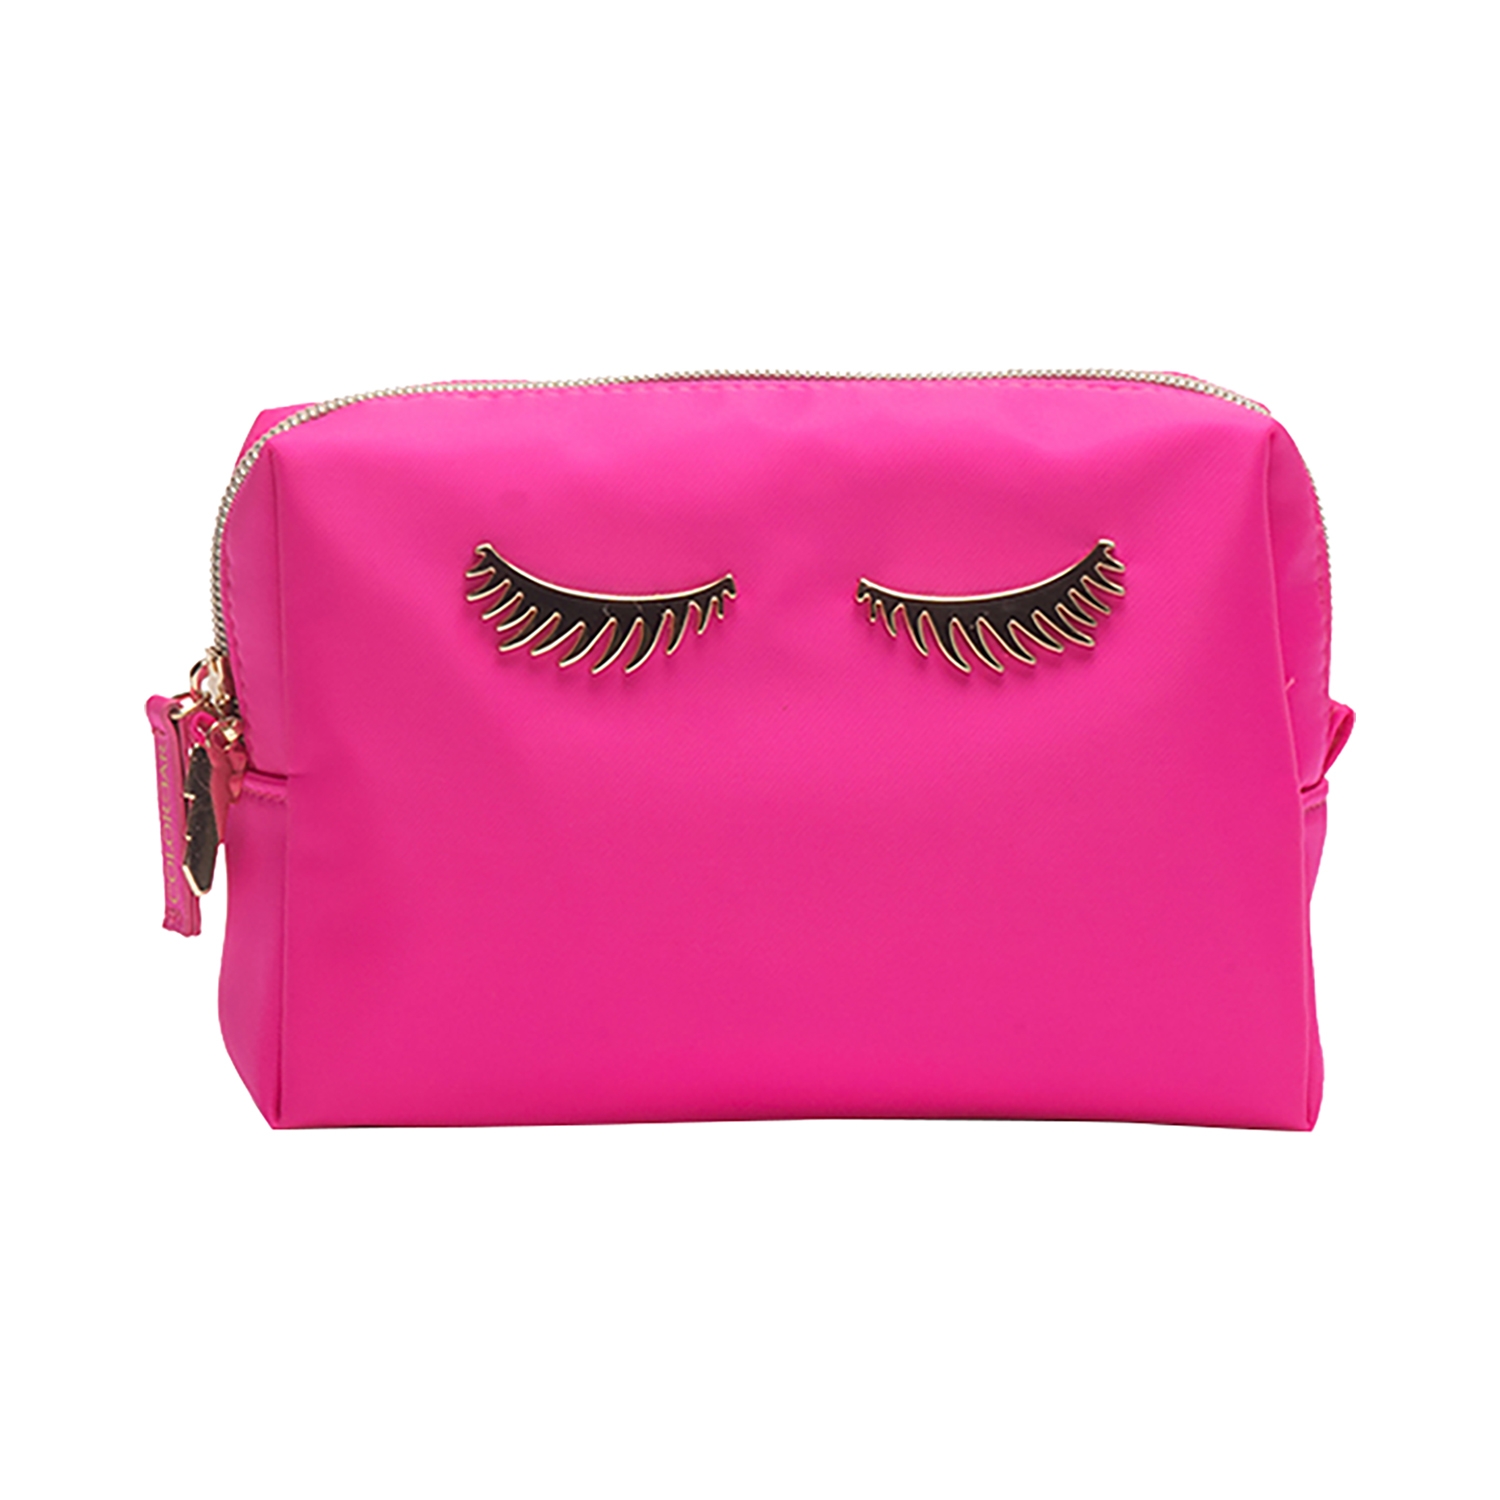 Colorbar | Colorbar Lips & Lashes Small Pouch - Neon Pink